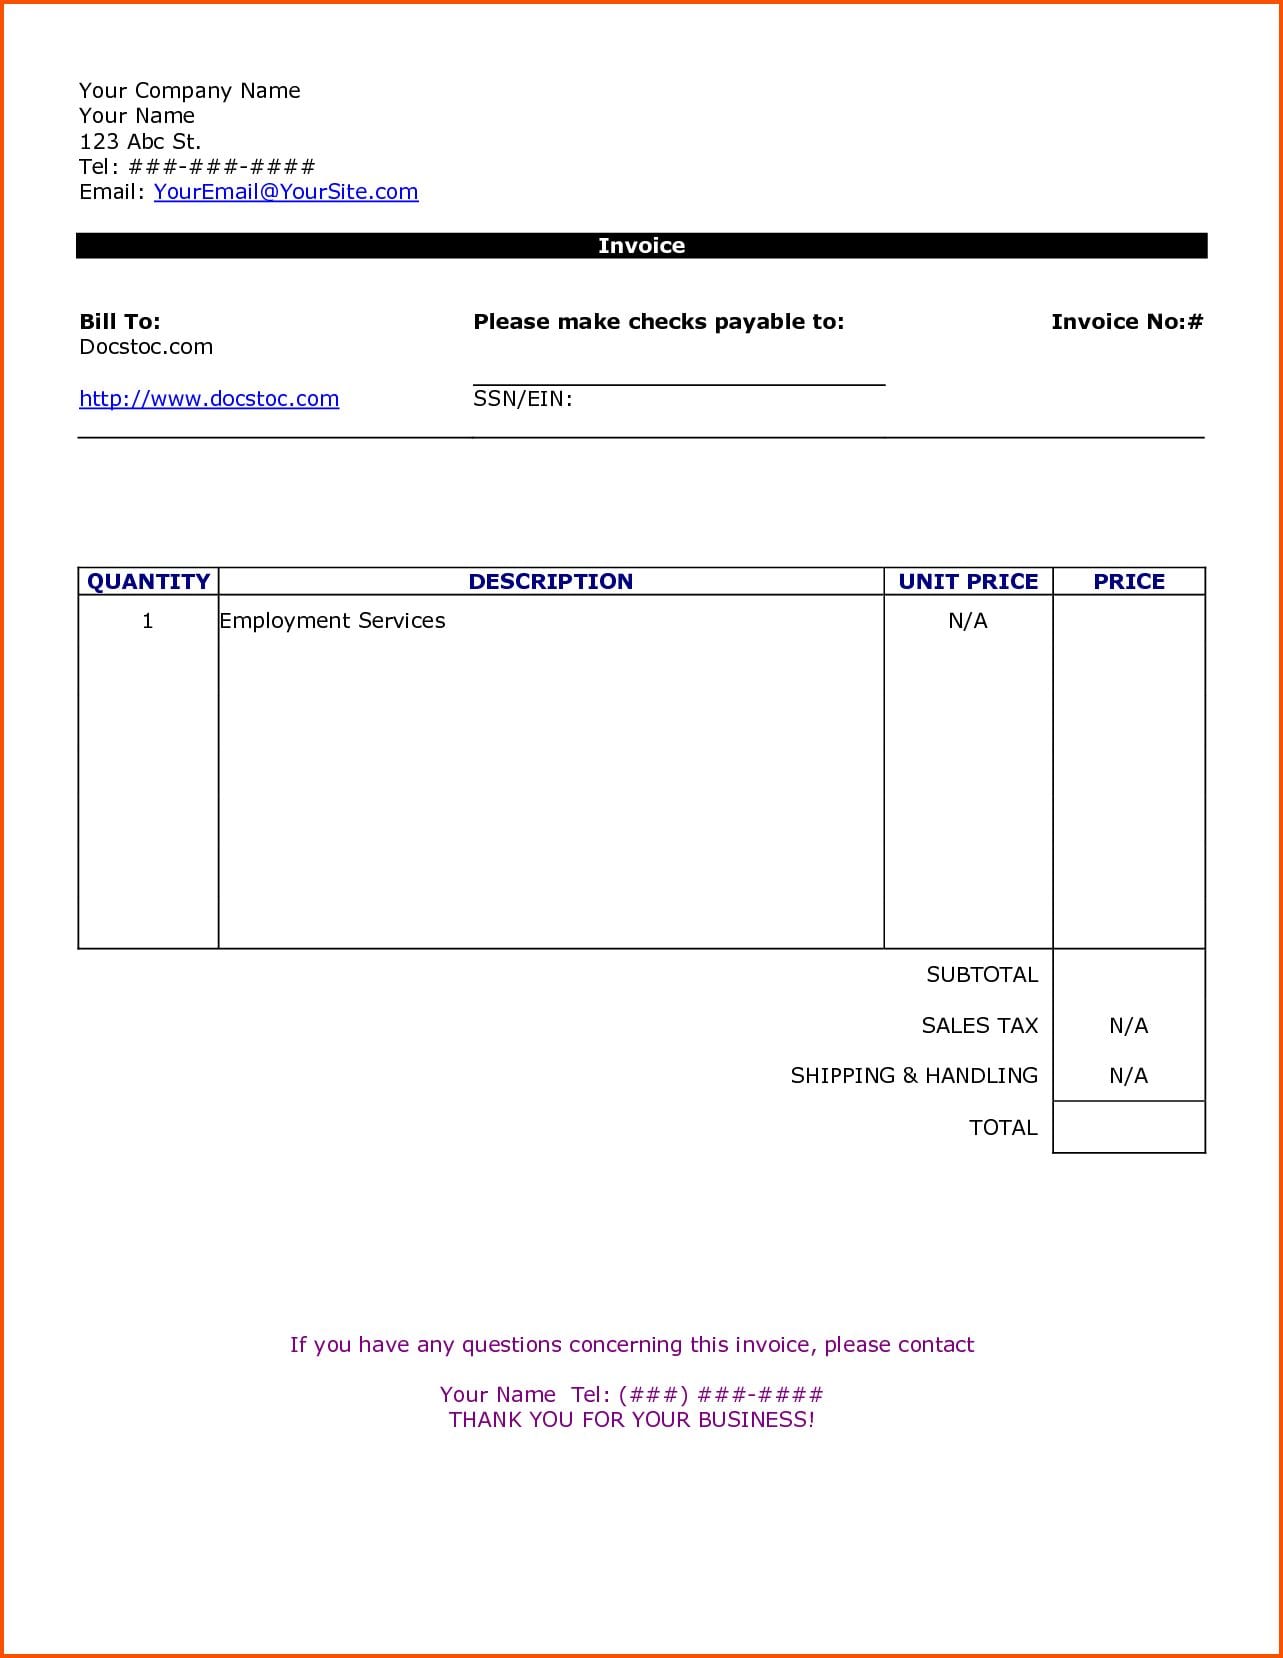 Independent Contractor Invoice Sample